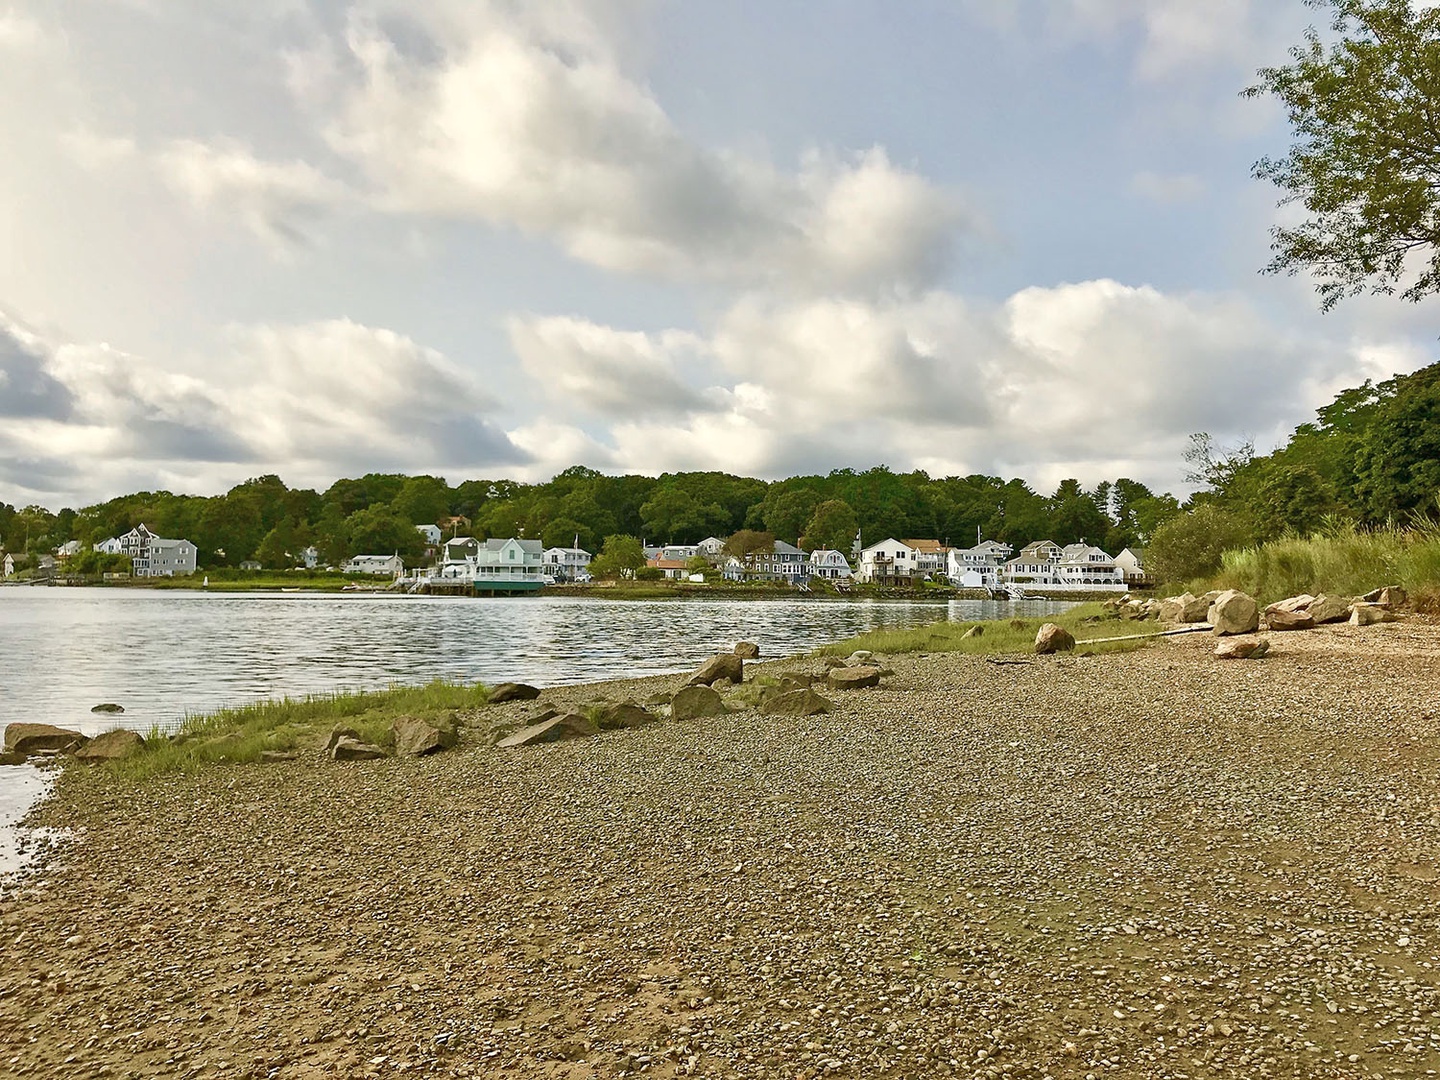 Partial view of the beach at Obear Park and the Danvers River.